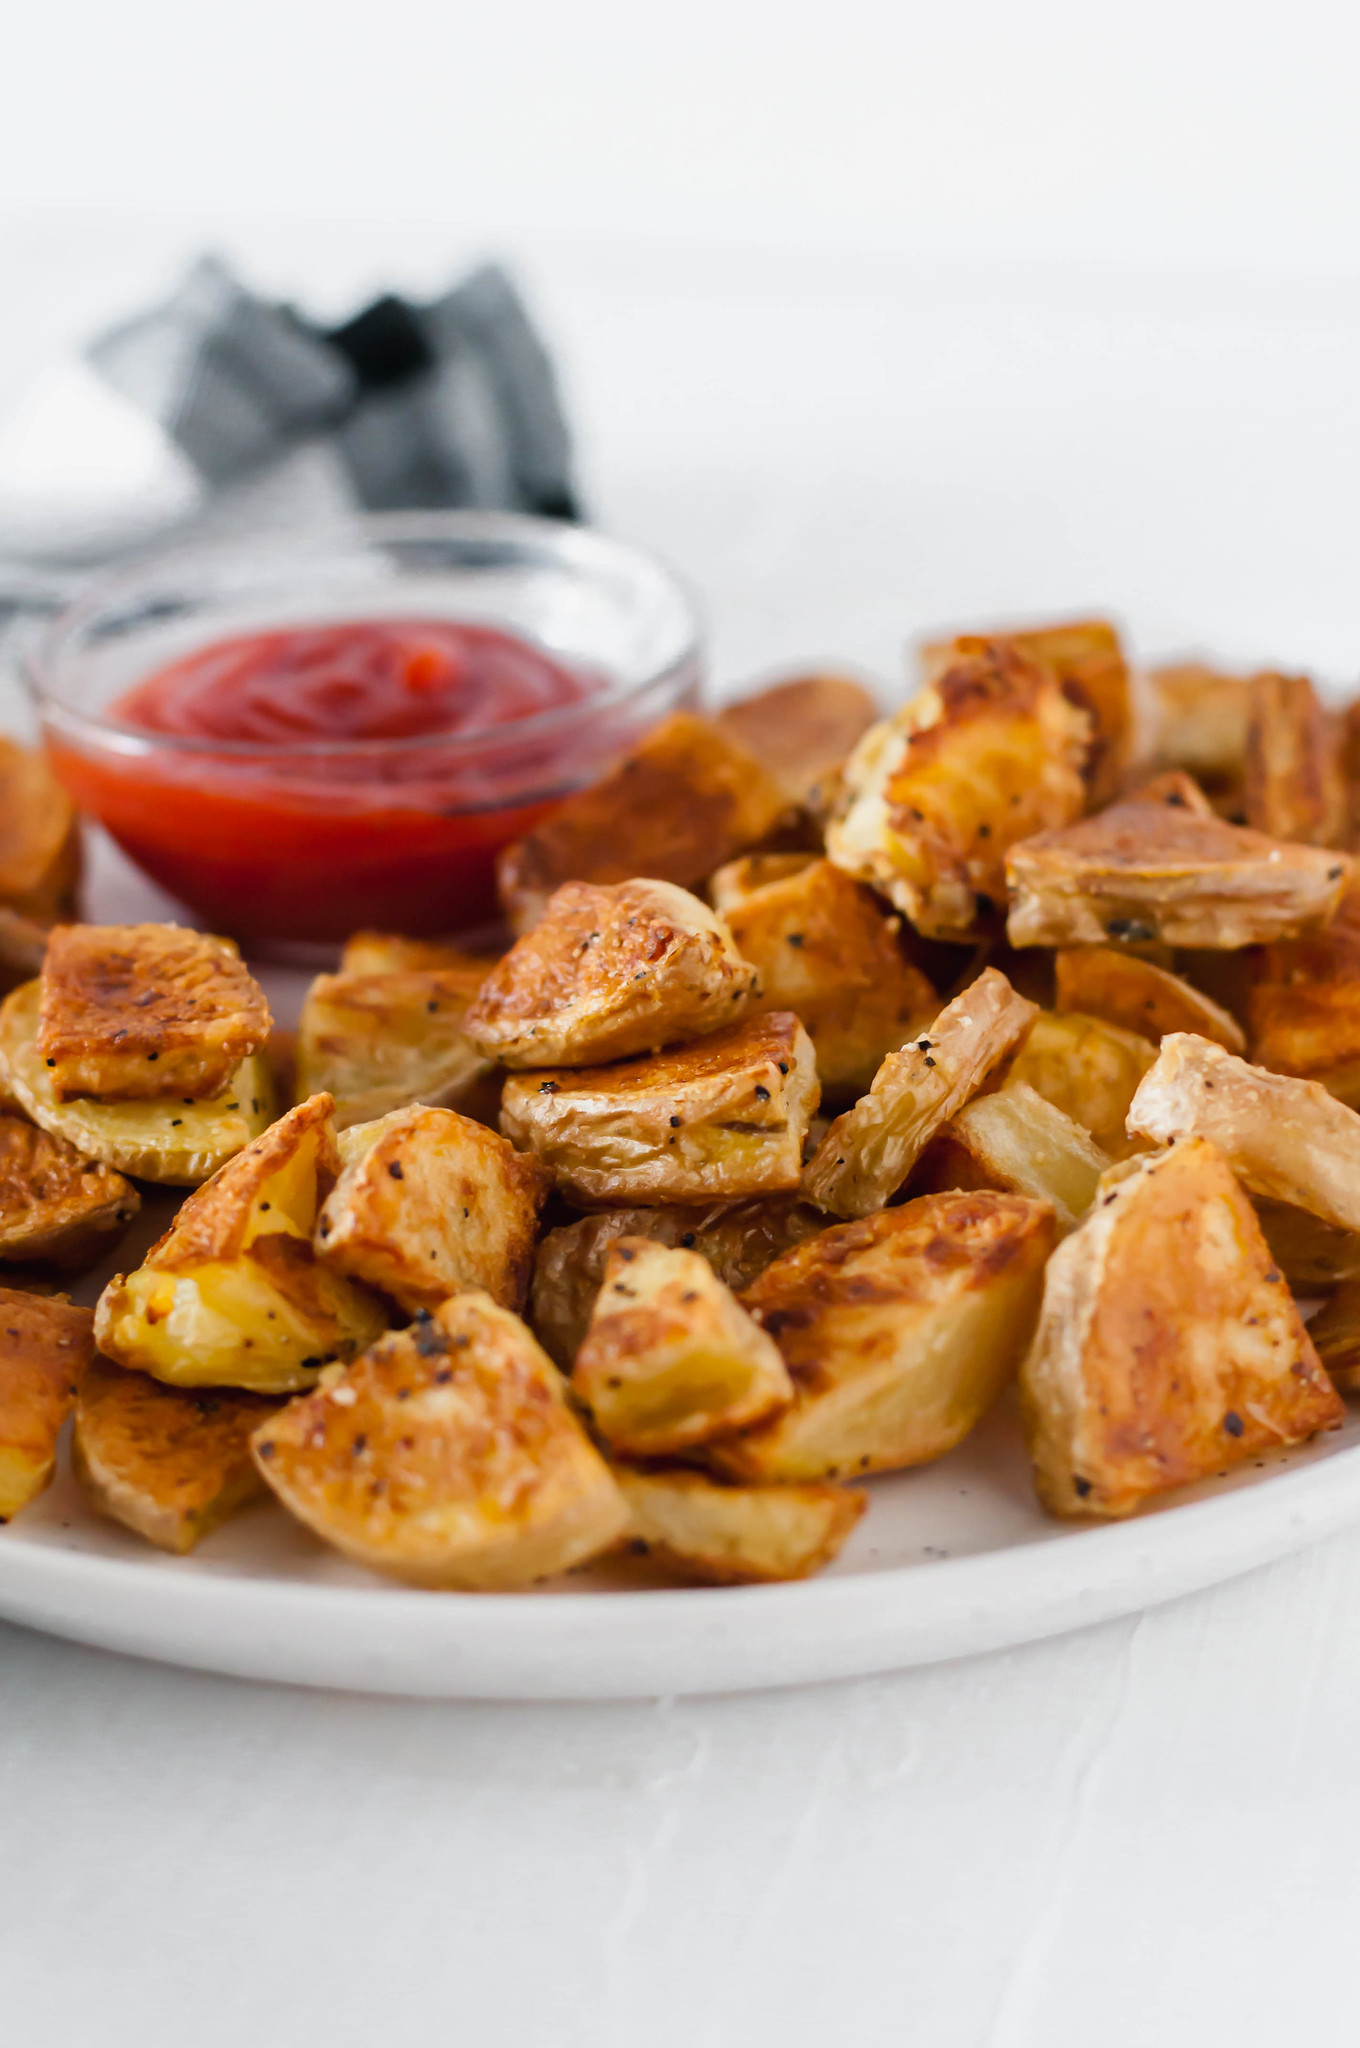 Learn how to make the crispiest potatoes around. These Crispy Roasted Potatoes are simple to make. The crispy exterior and tender, fluffy interior will blow your mind. Read the post for all the tips on making crispy roasted potatoes.